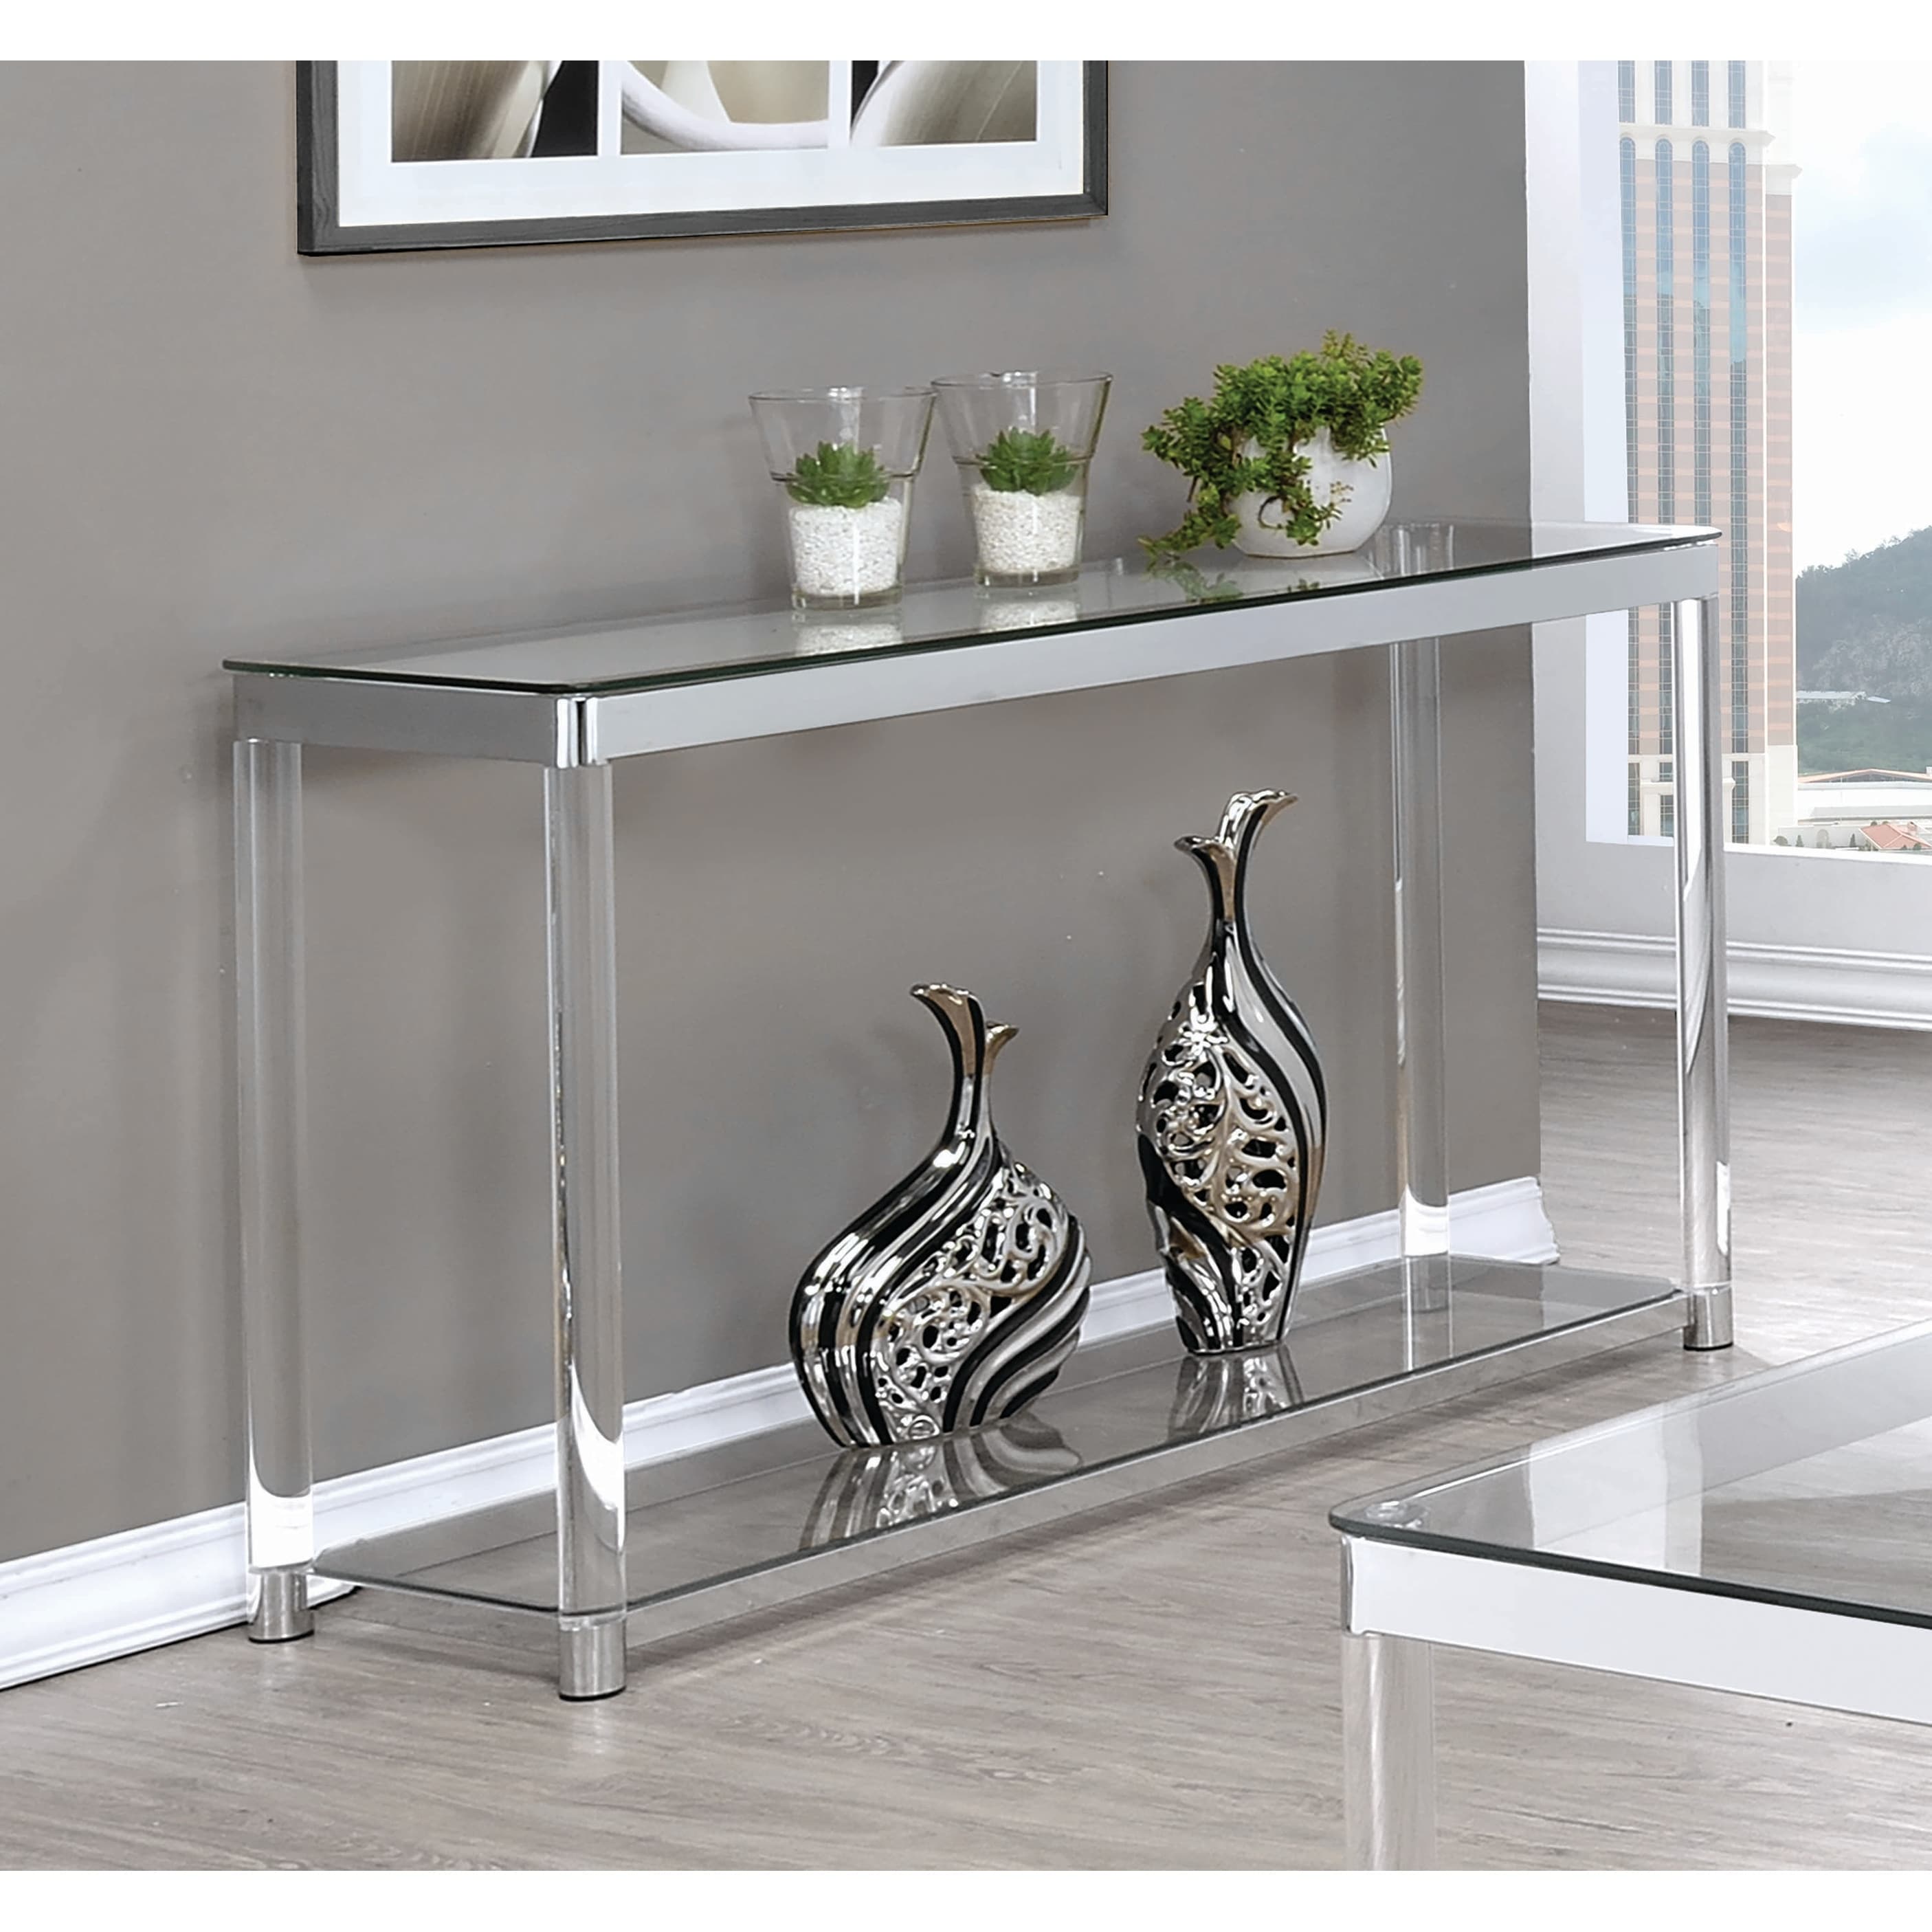 Trendy chrome and glass sofa table Contemporary Chrome Glass And Acrylic Sofa Table 48 X 15 75 30 On Sale Overstock 21339051